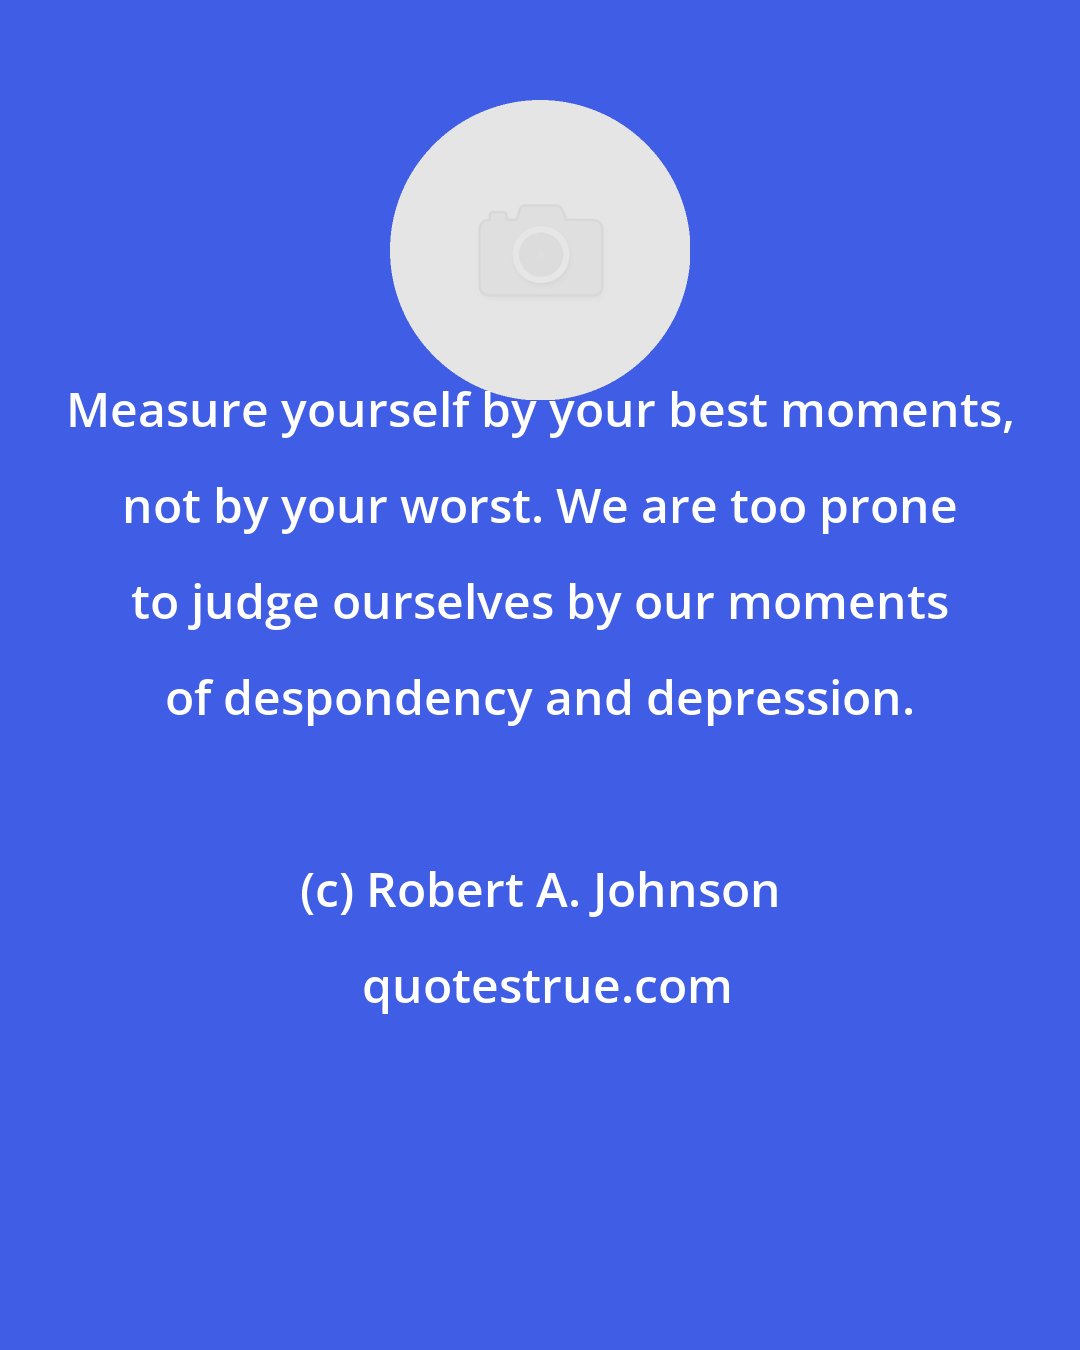 Robert A. Johnson: Measure yourself by your best moments, not by your worst. We are too prone to judge ourselves by our moments of despondency and depression.